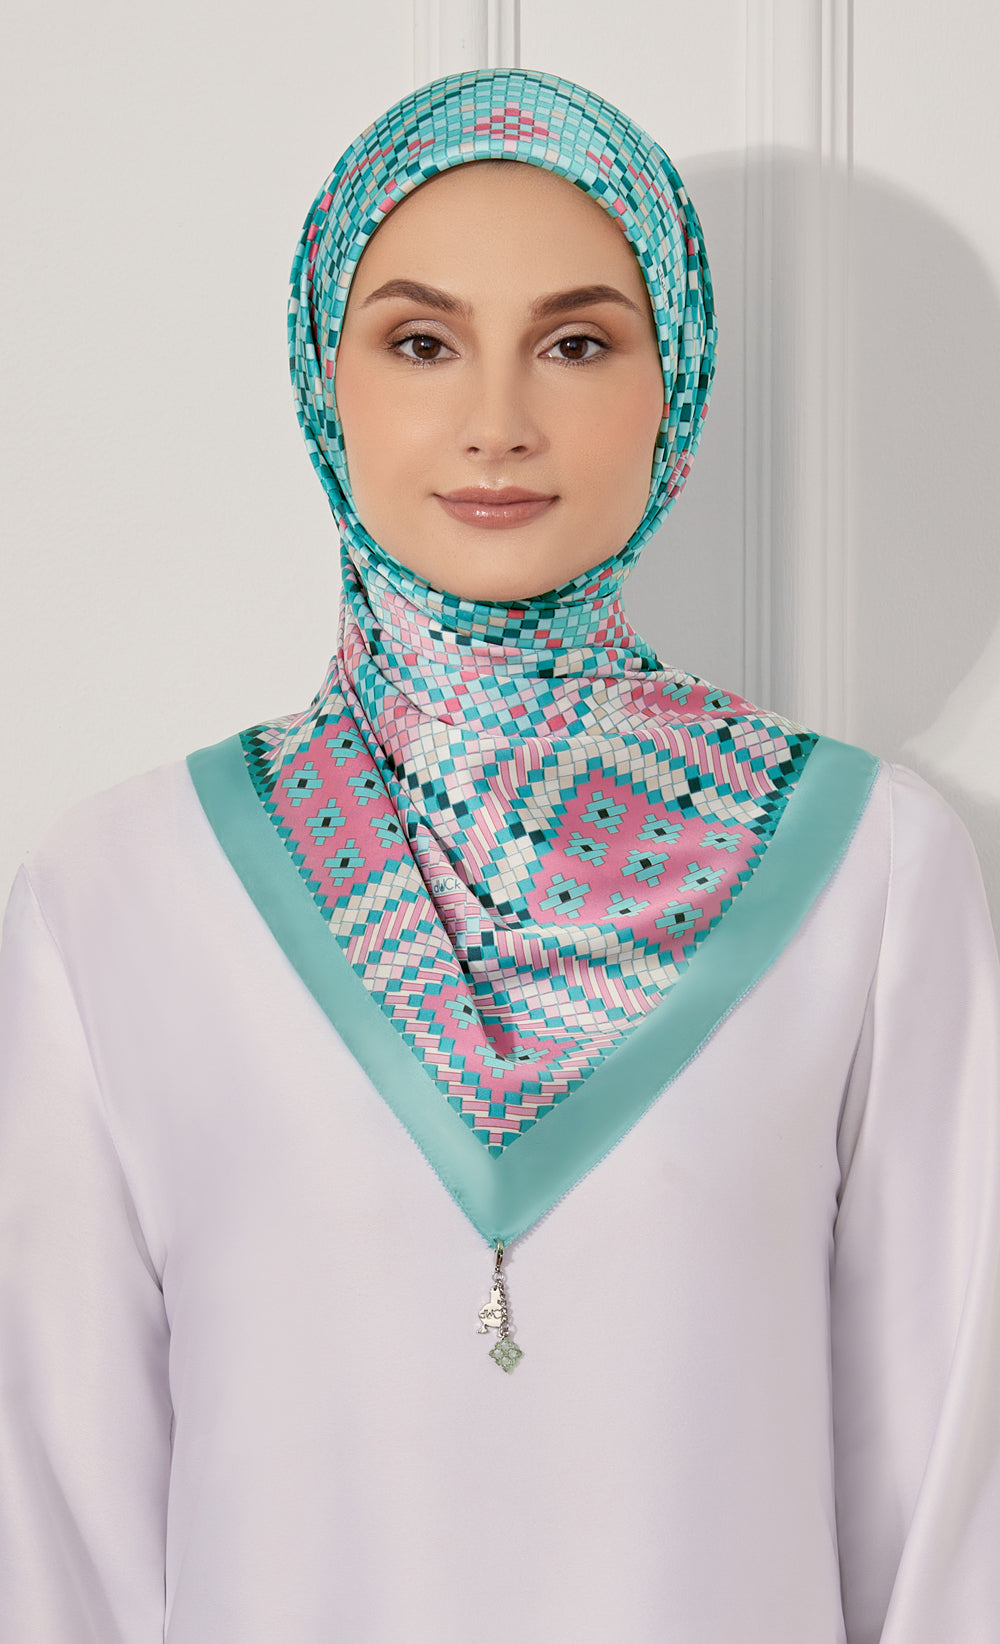 The Ikatan dUCk Square Scarf in Jalinan